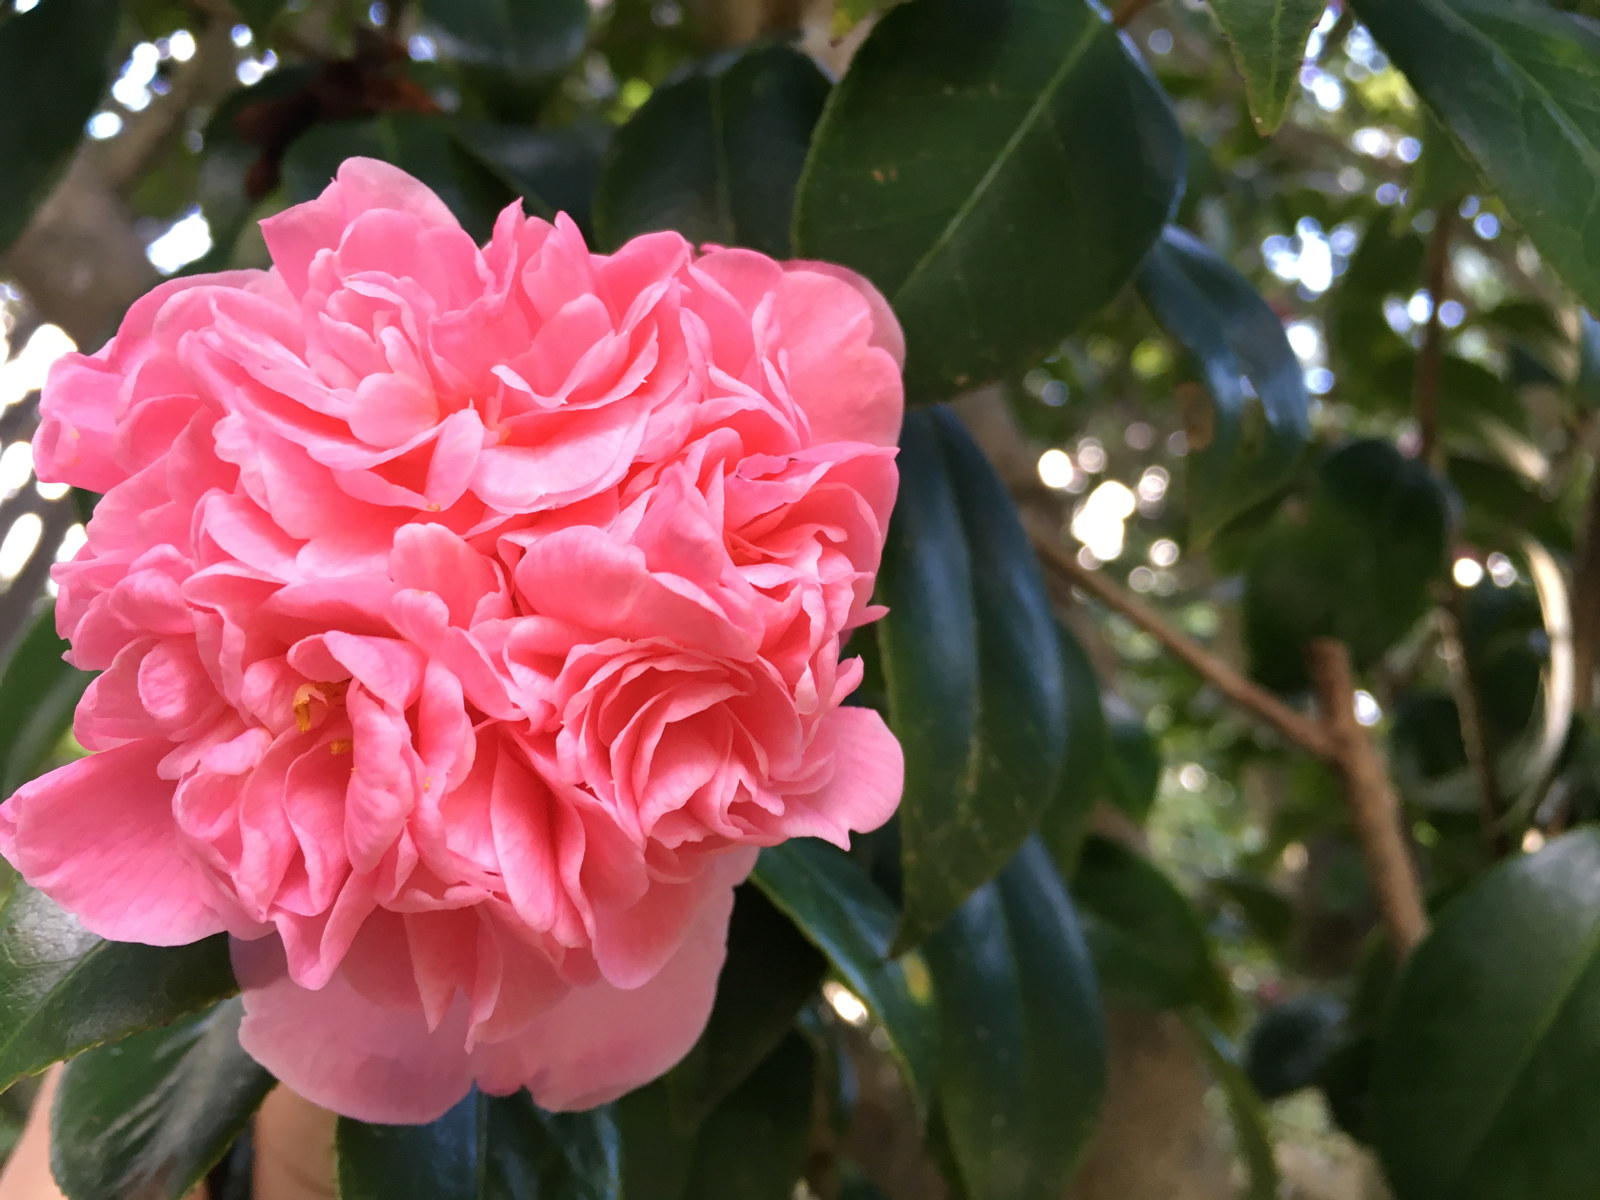 Camellia japonica 'Pompone' at Vaucluse House is a pretty informal double pink flowering variety